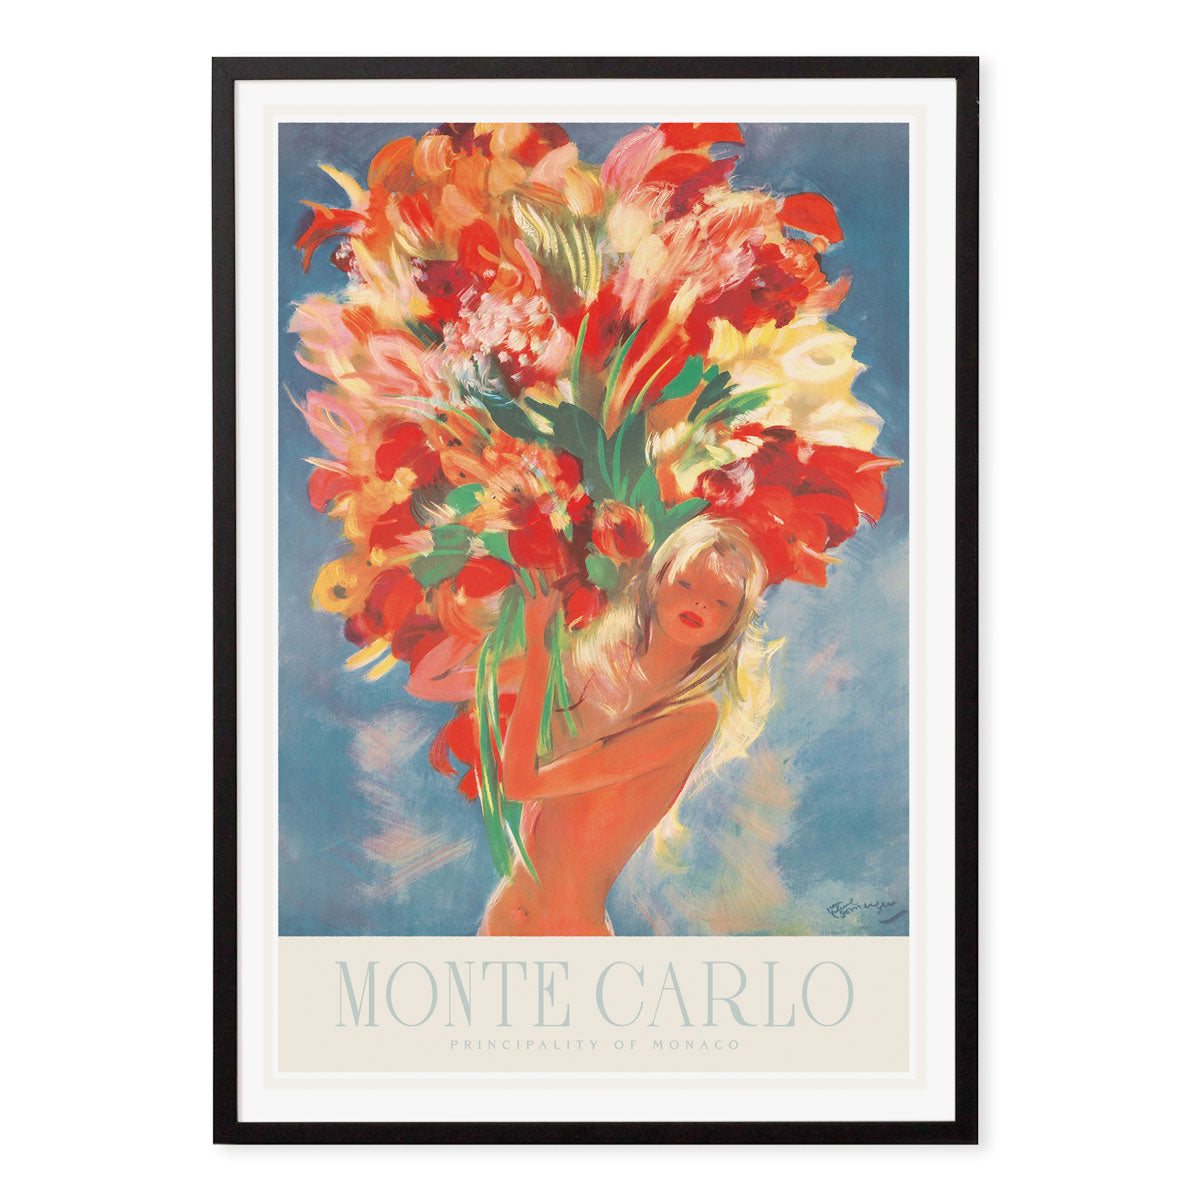 Monte Carlo Flowers retro vintage travel poster print in black frame from Places We Luv